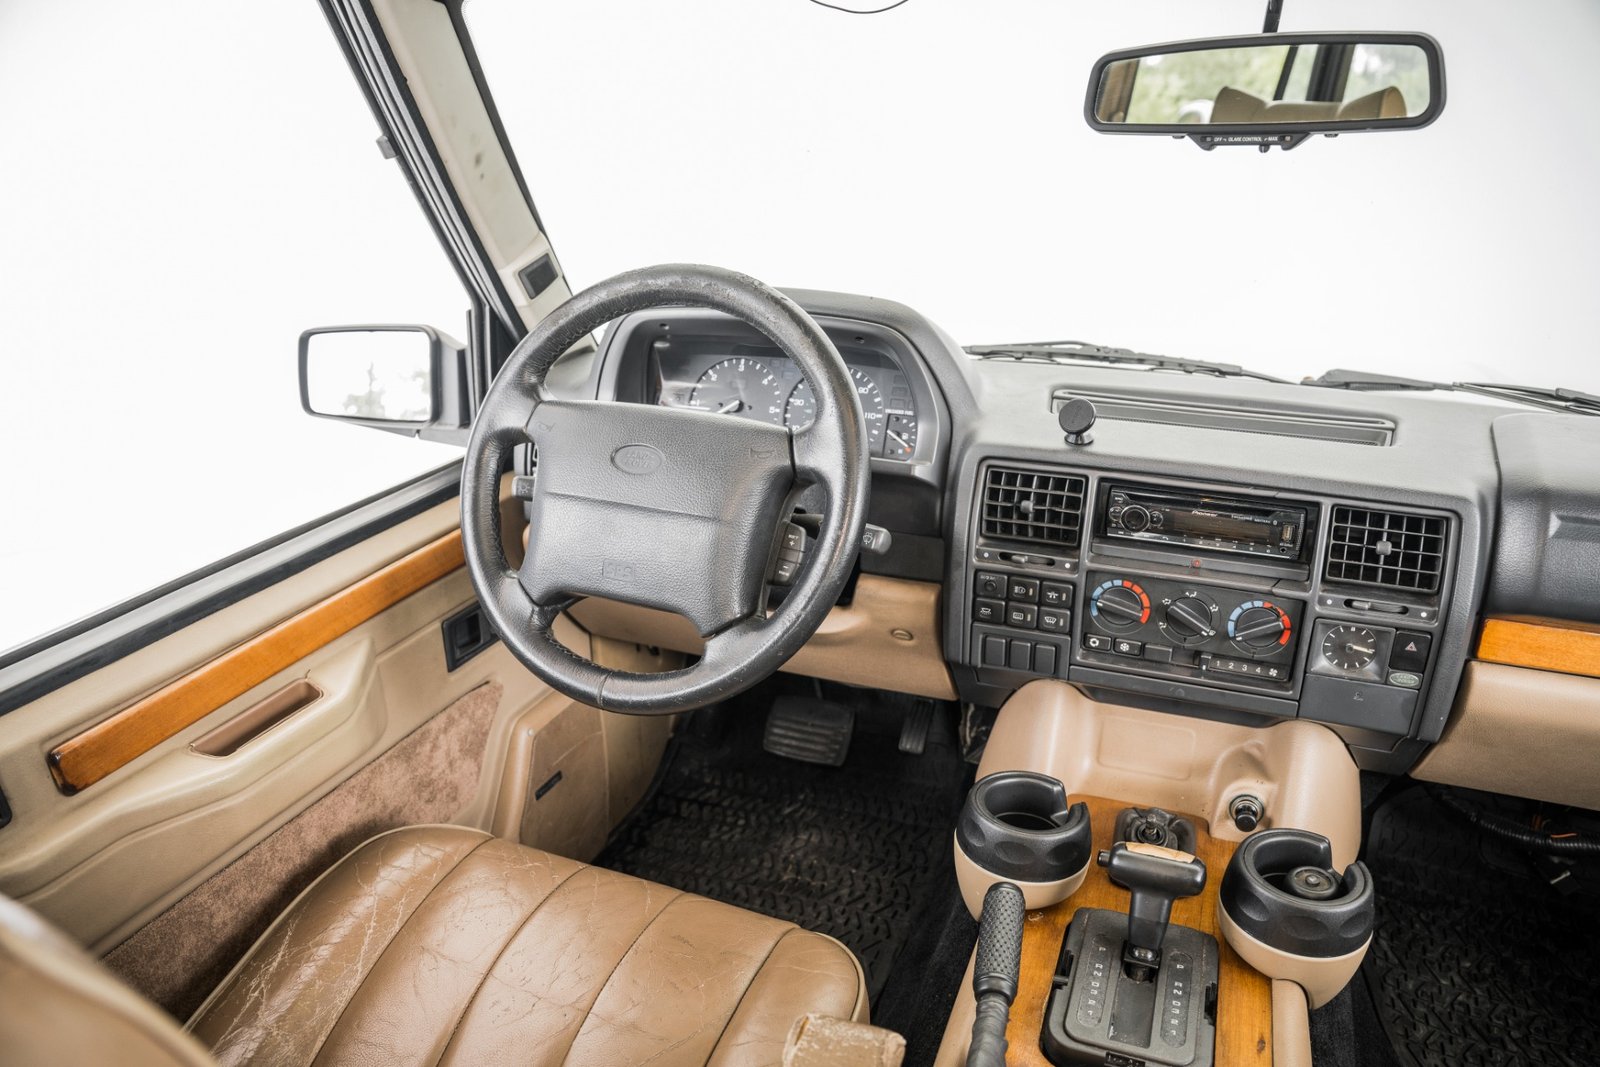 Used 1995 RANGE ROVER COUNTY CLASSIC (14)